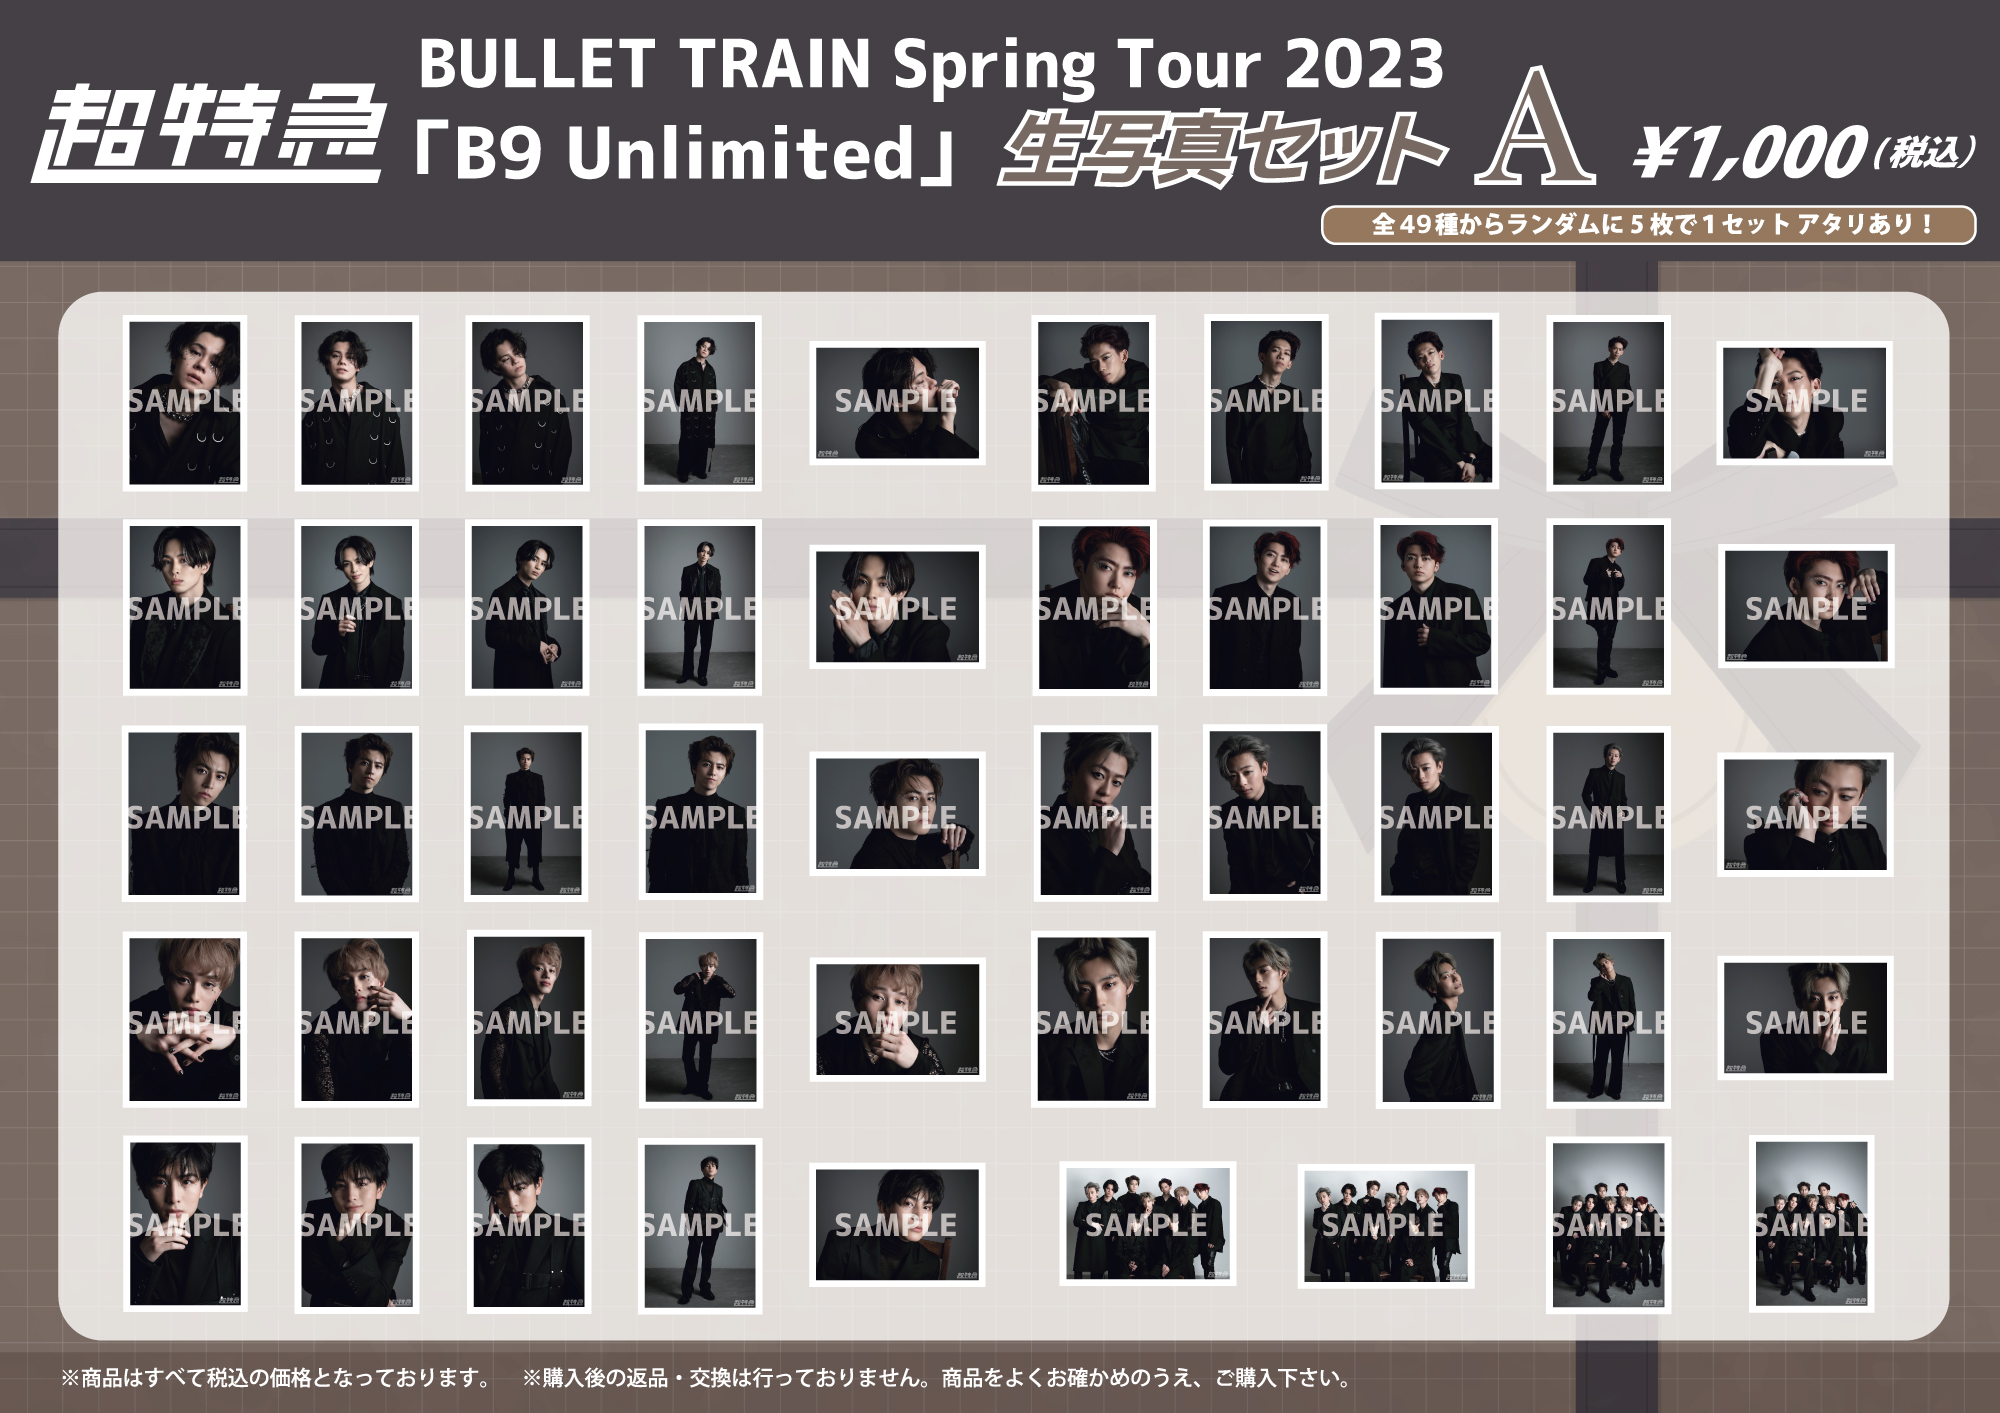 BULLET TRAIN Spring Tour 2023「B9 Unlimited」8号車の日 会場販売の